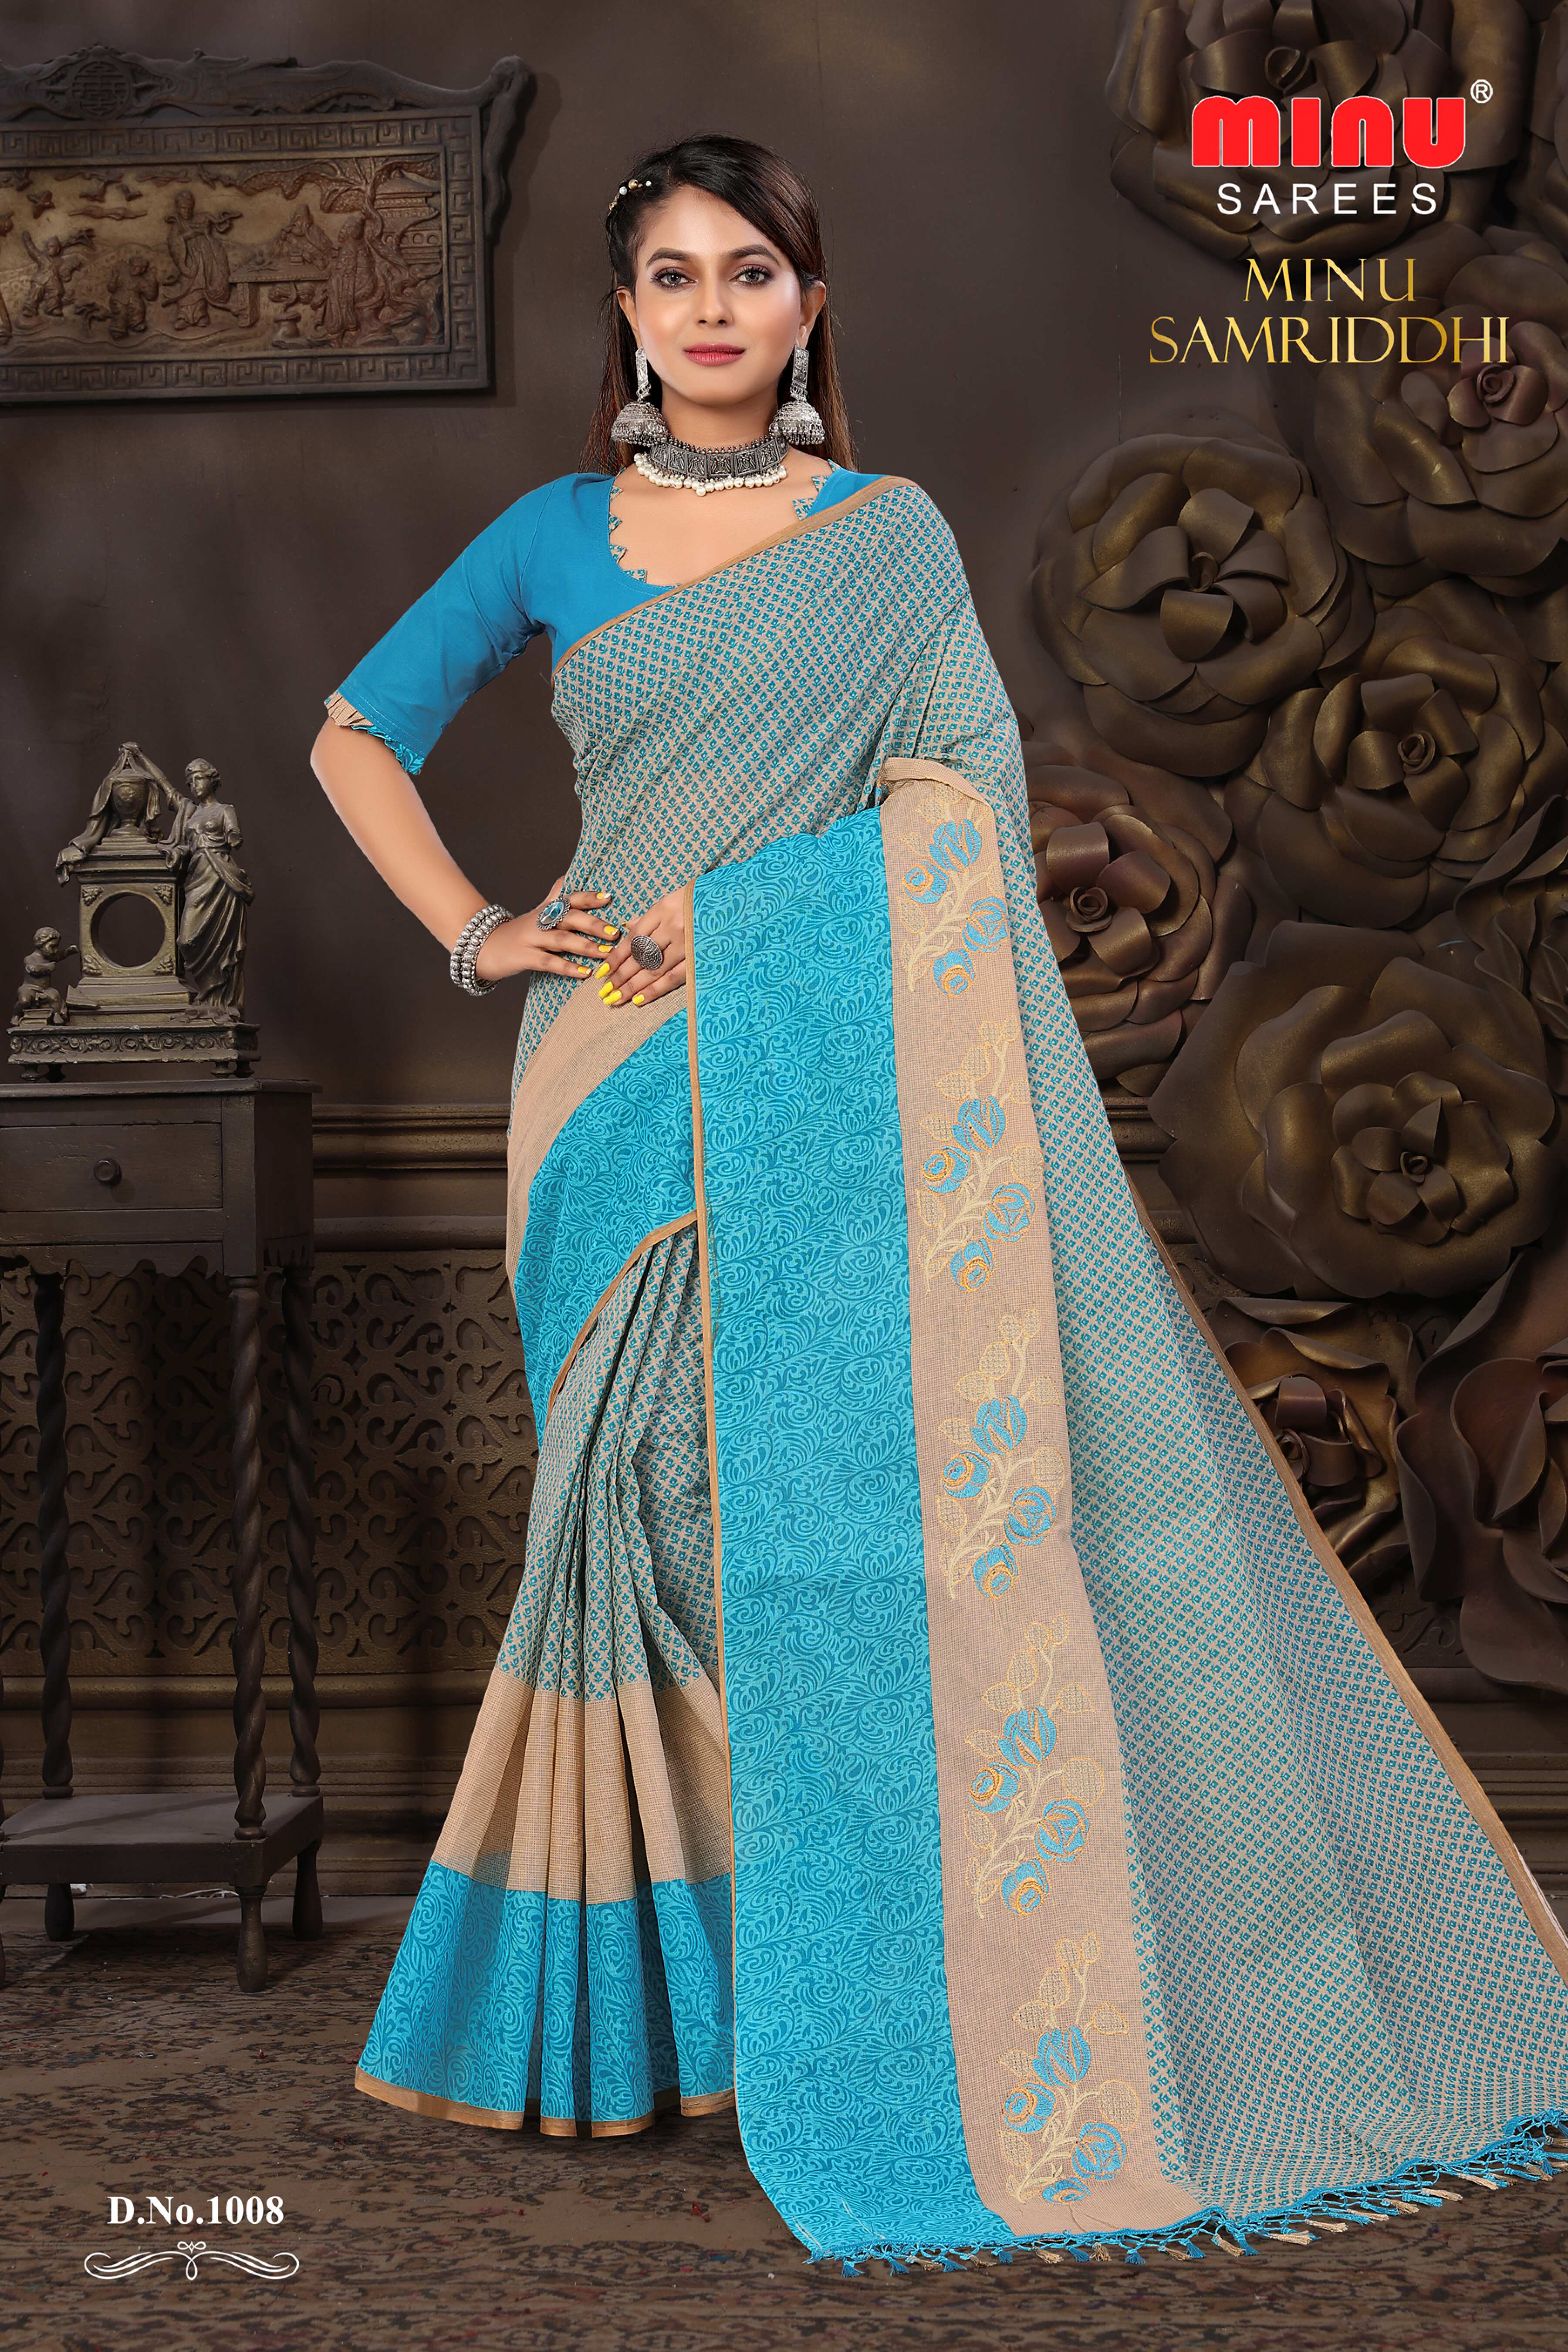 pure cotton saree wearing woman with blue prints